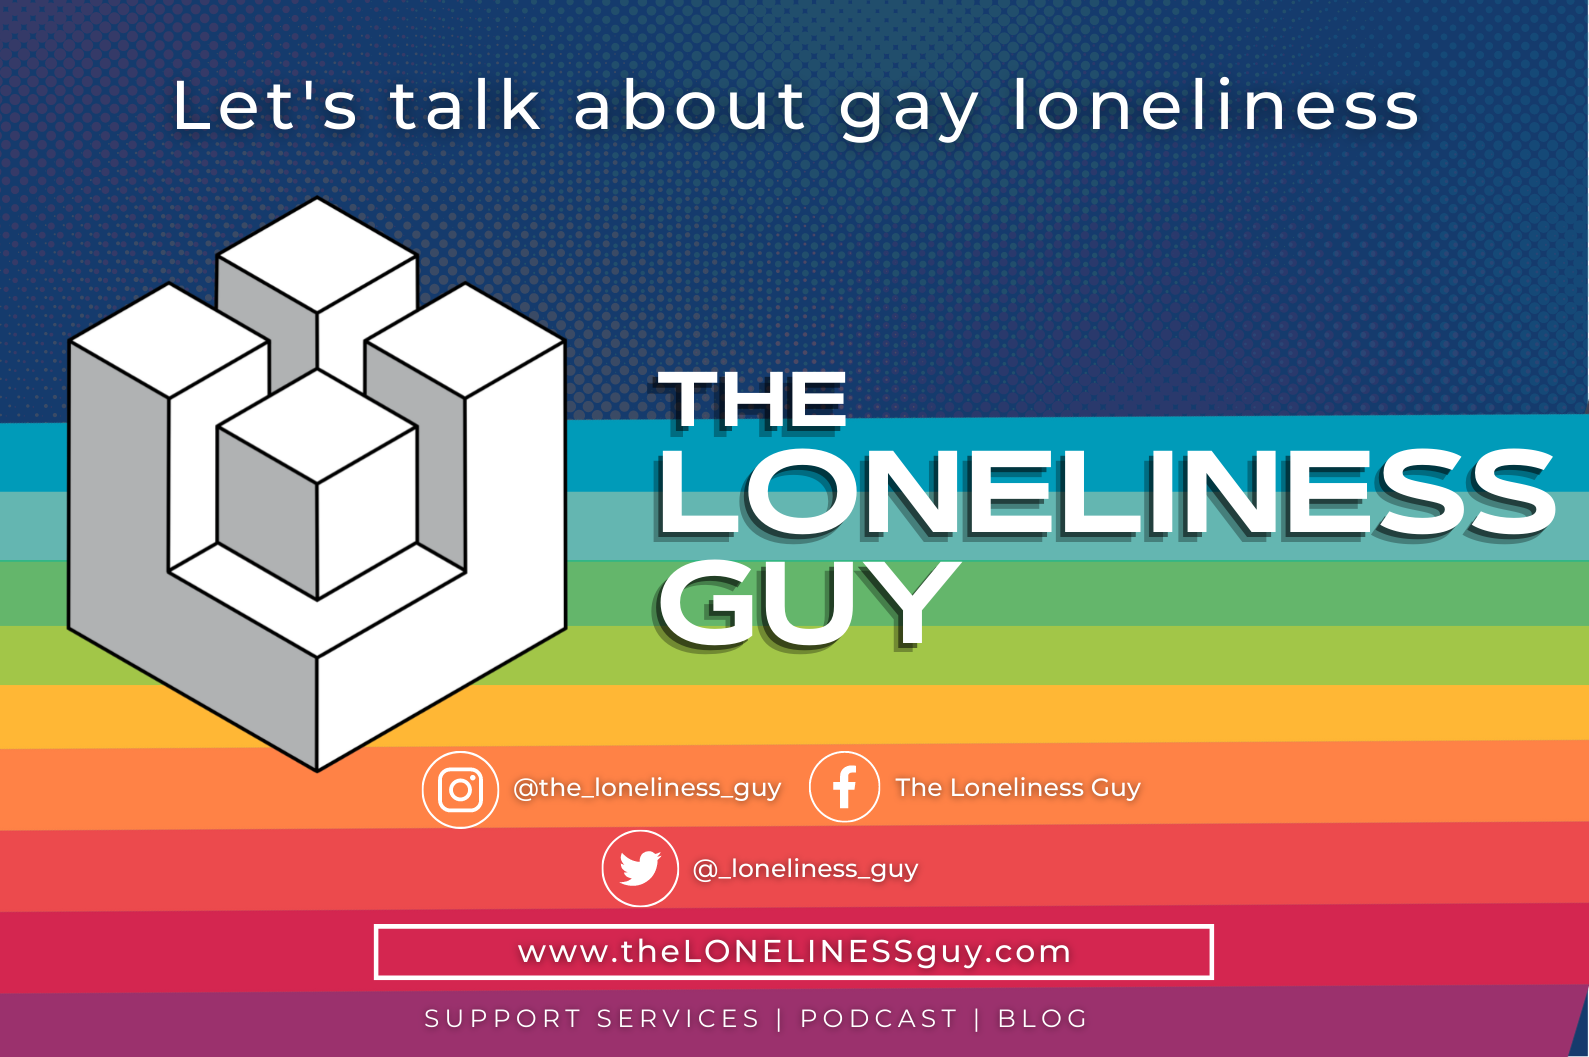 The Loneliness Guy Canberra LGBTIQ